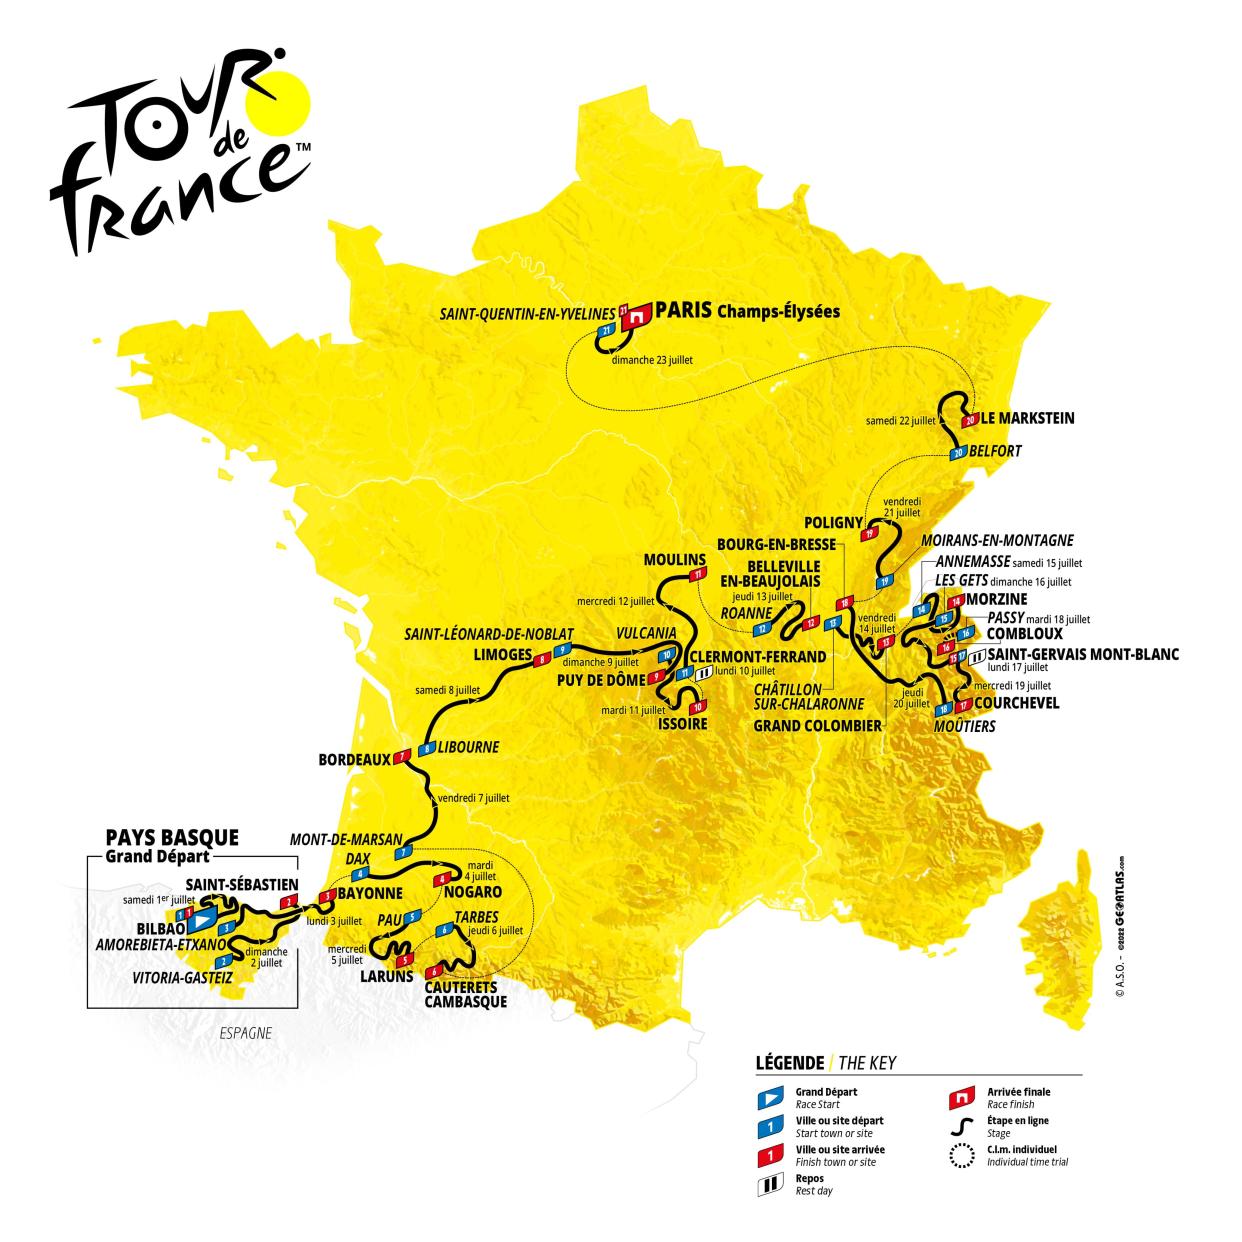  Tour de France 2023 route on the map of France 